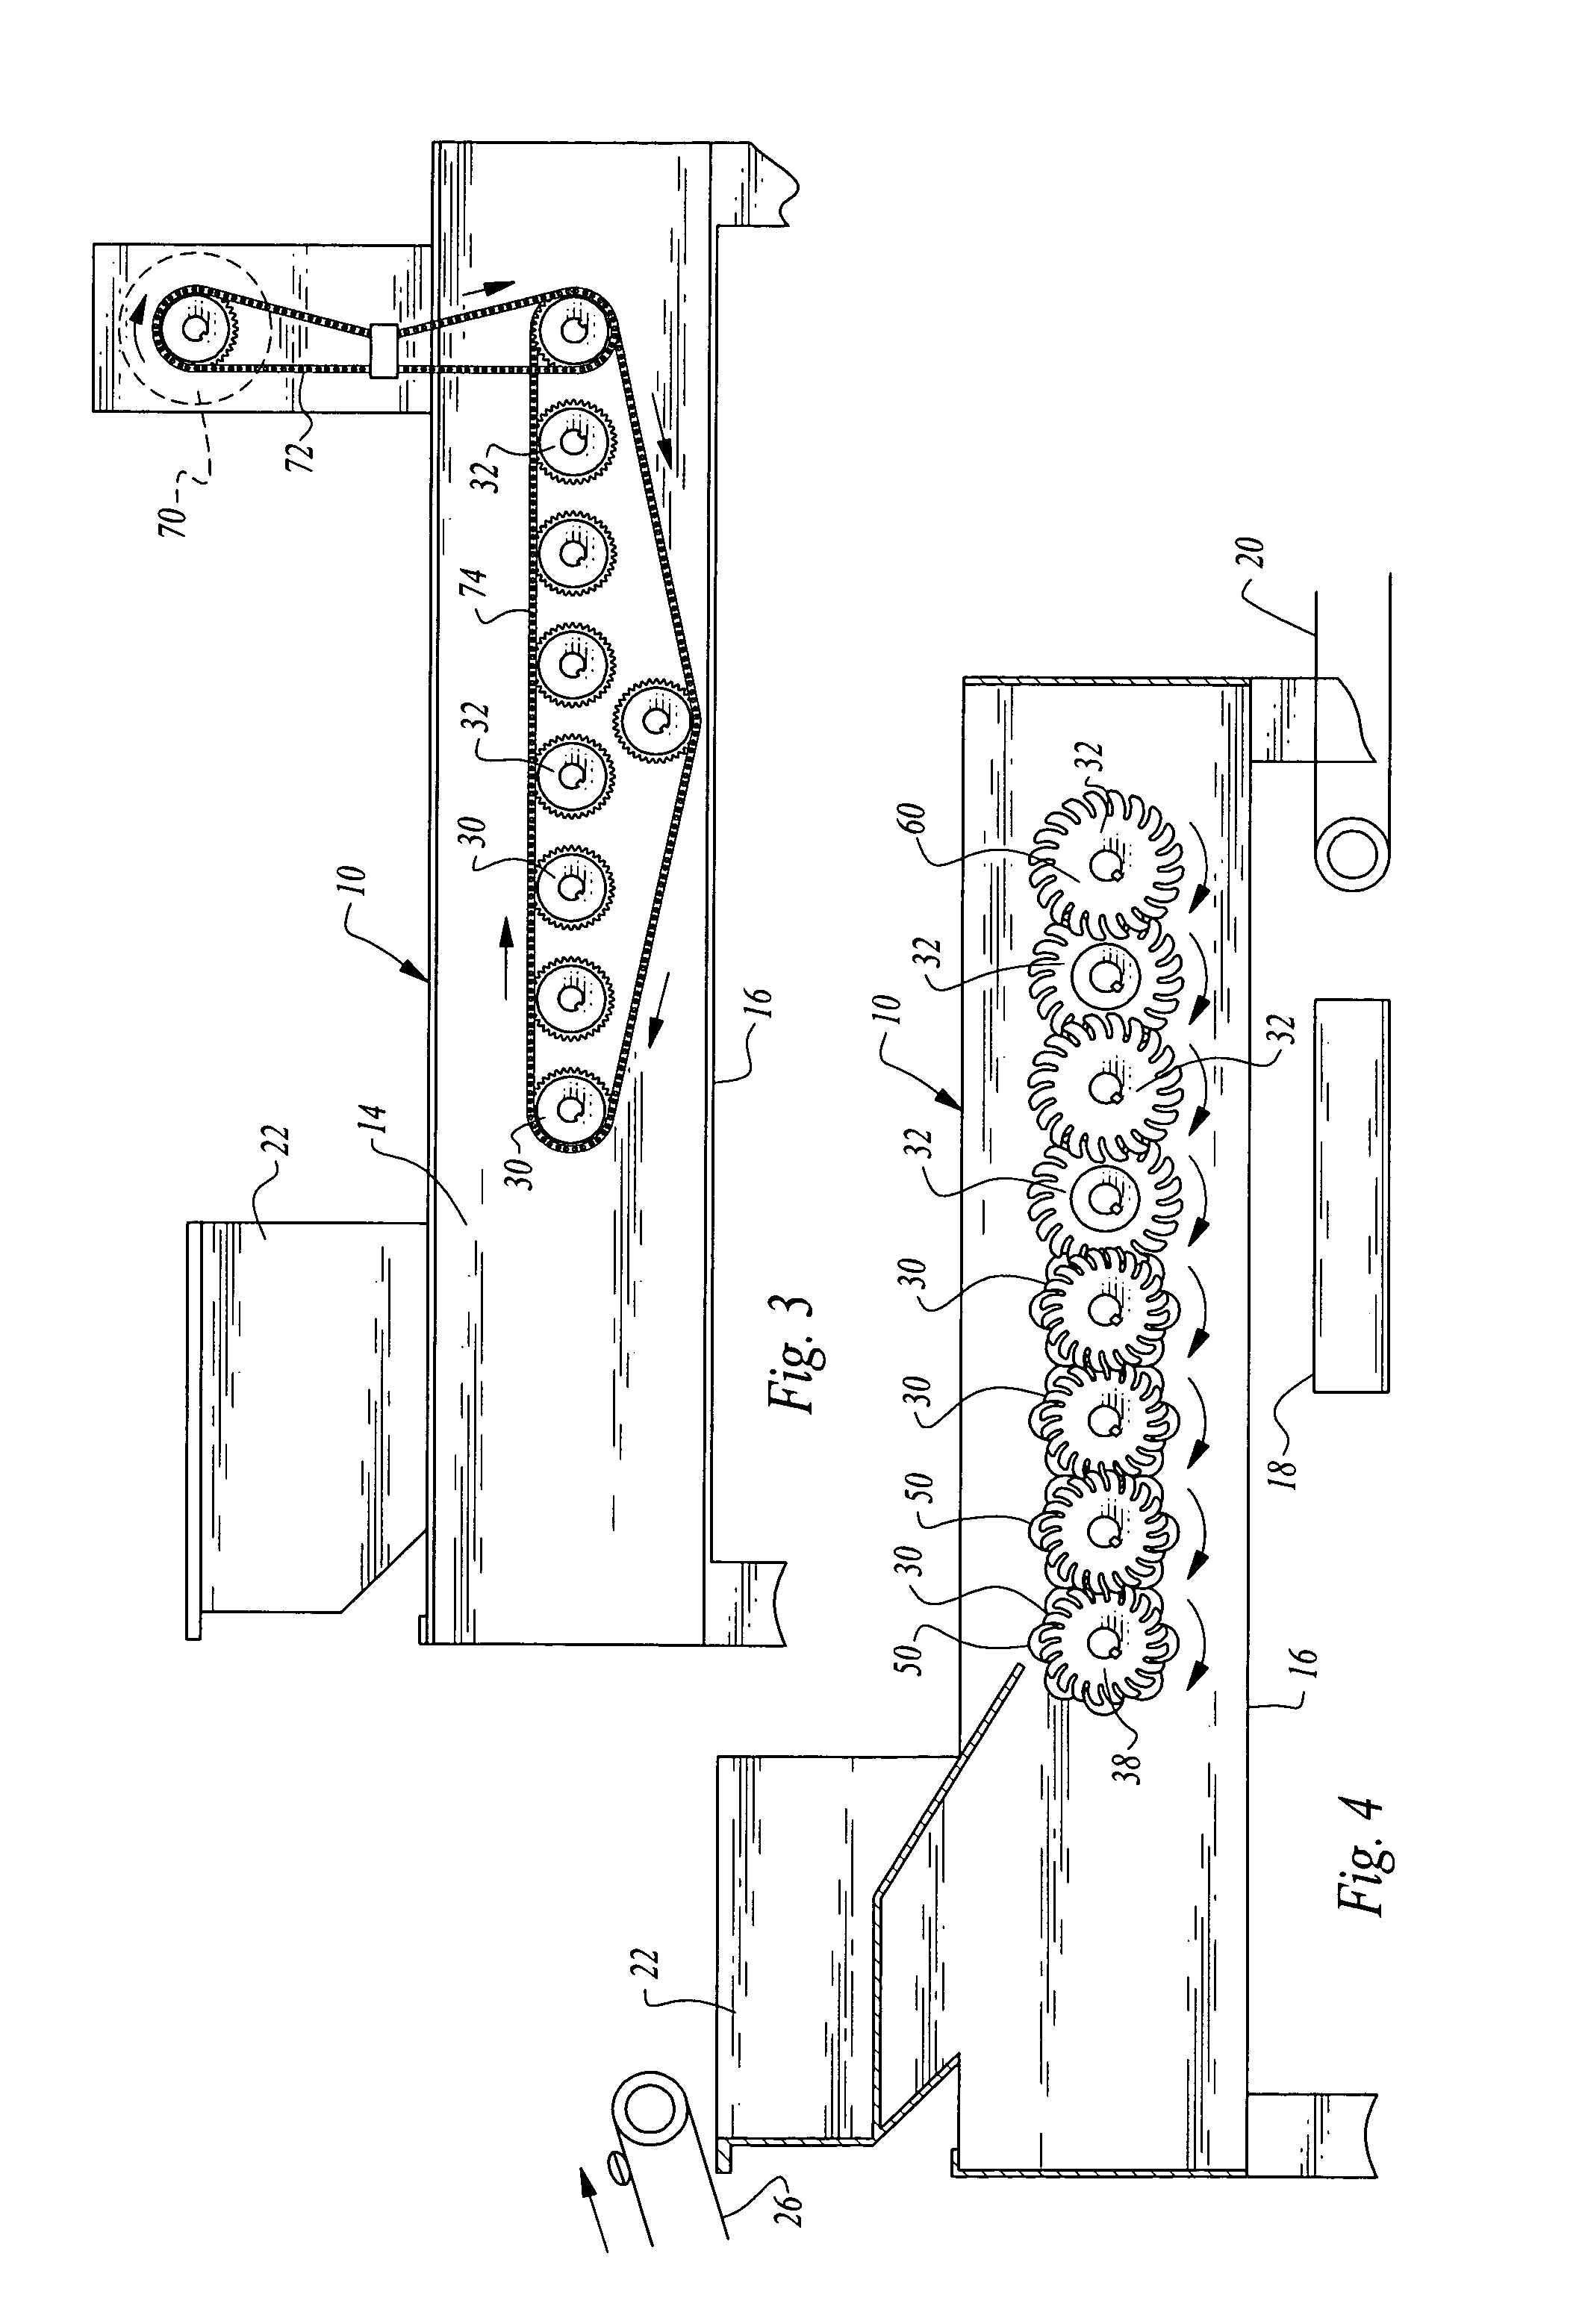 System for removing debris from a harvested tree crop product